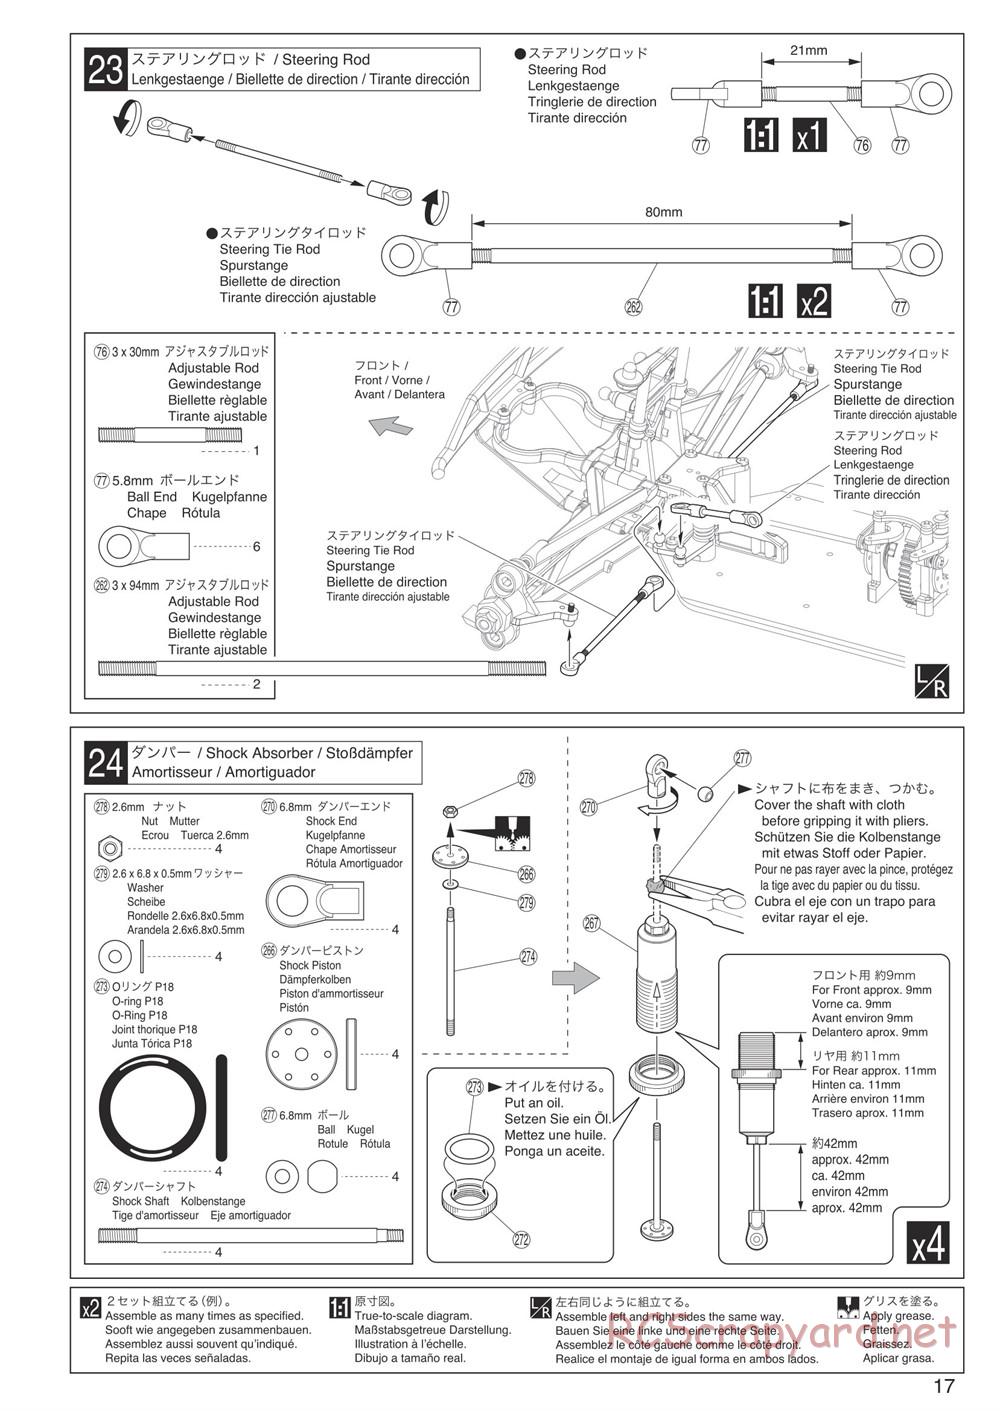 Kyosho - DMT - Manual - Page 17